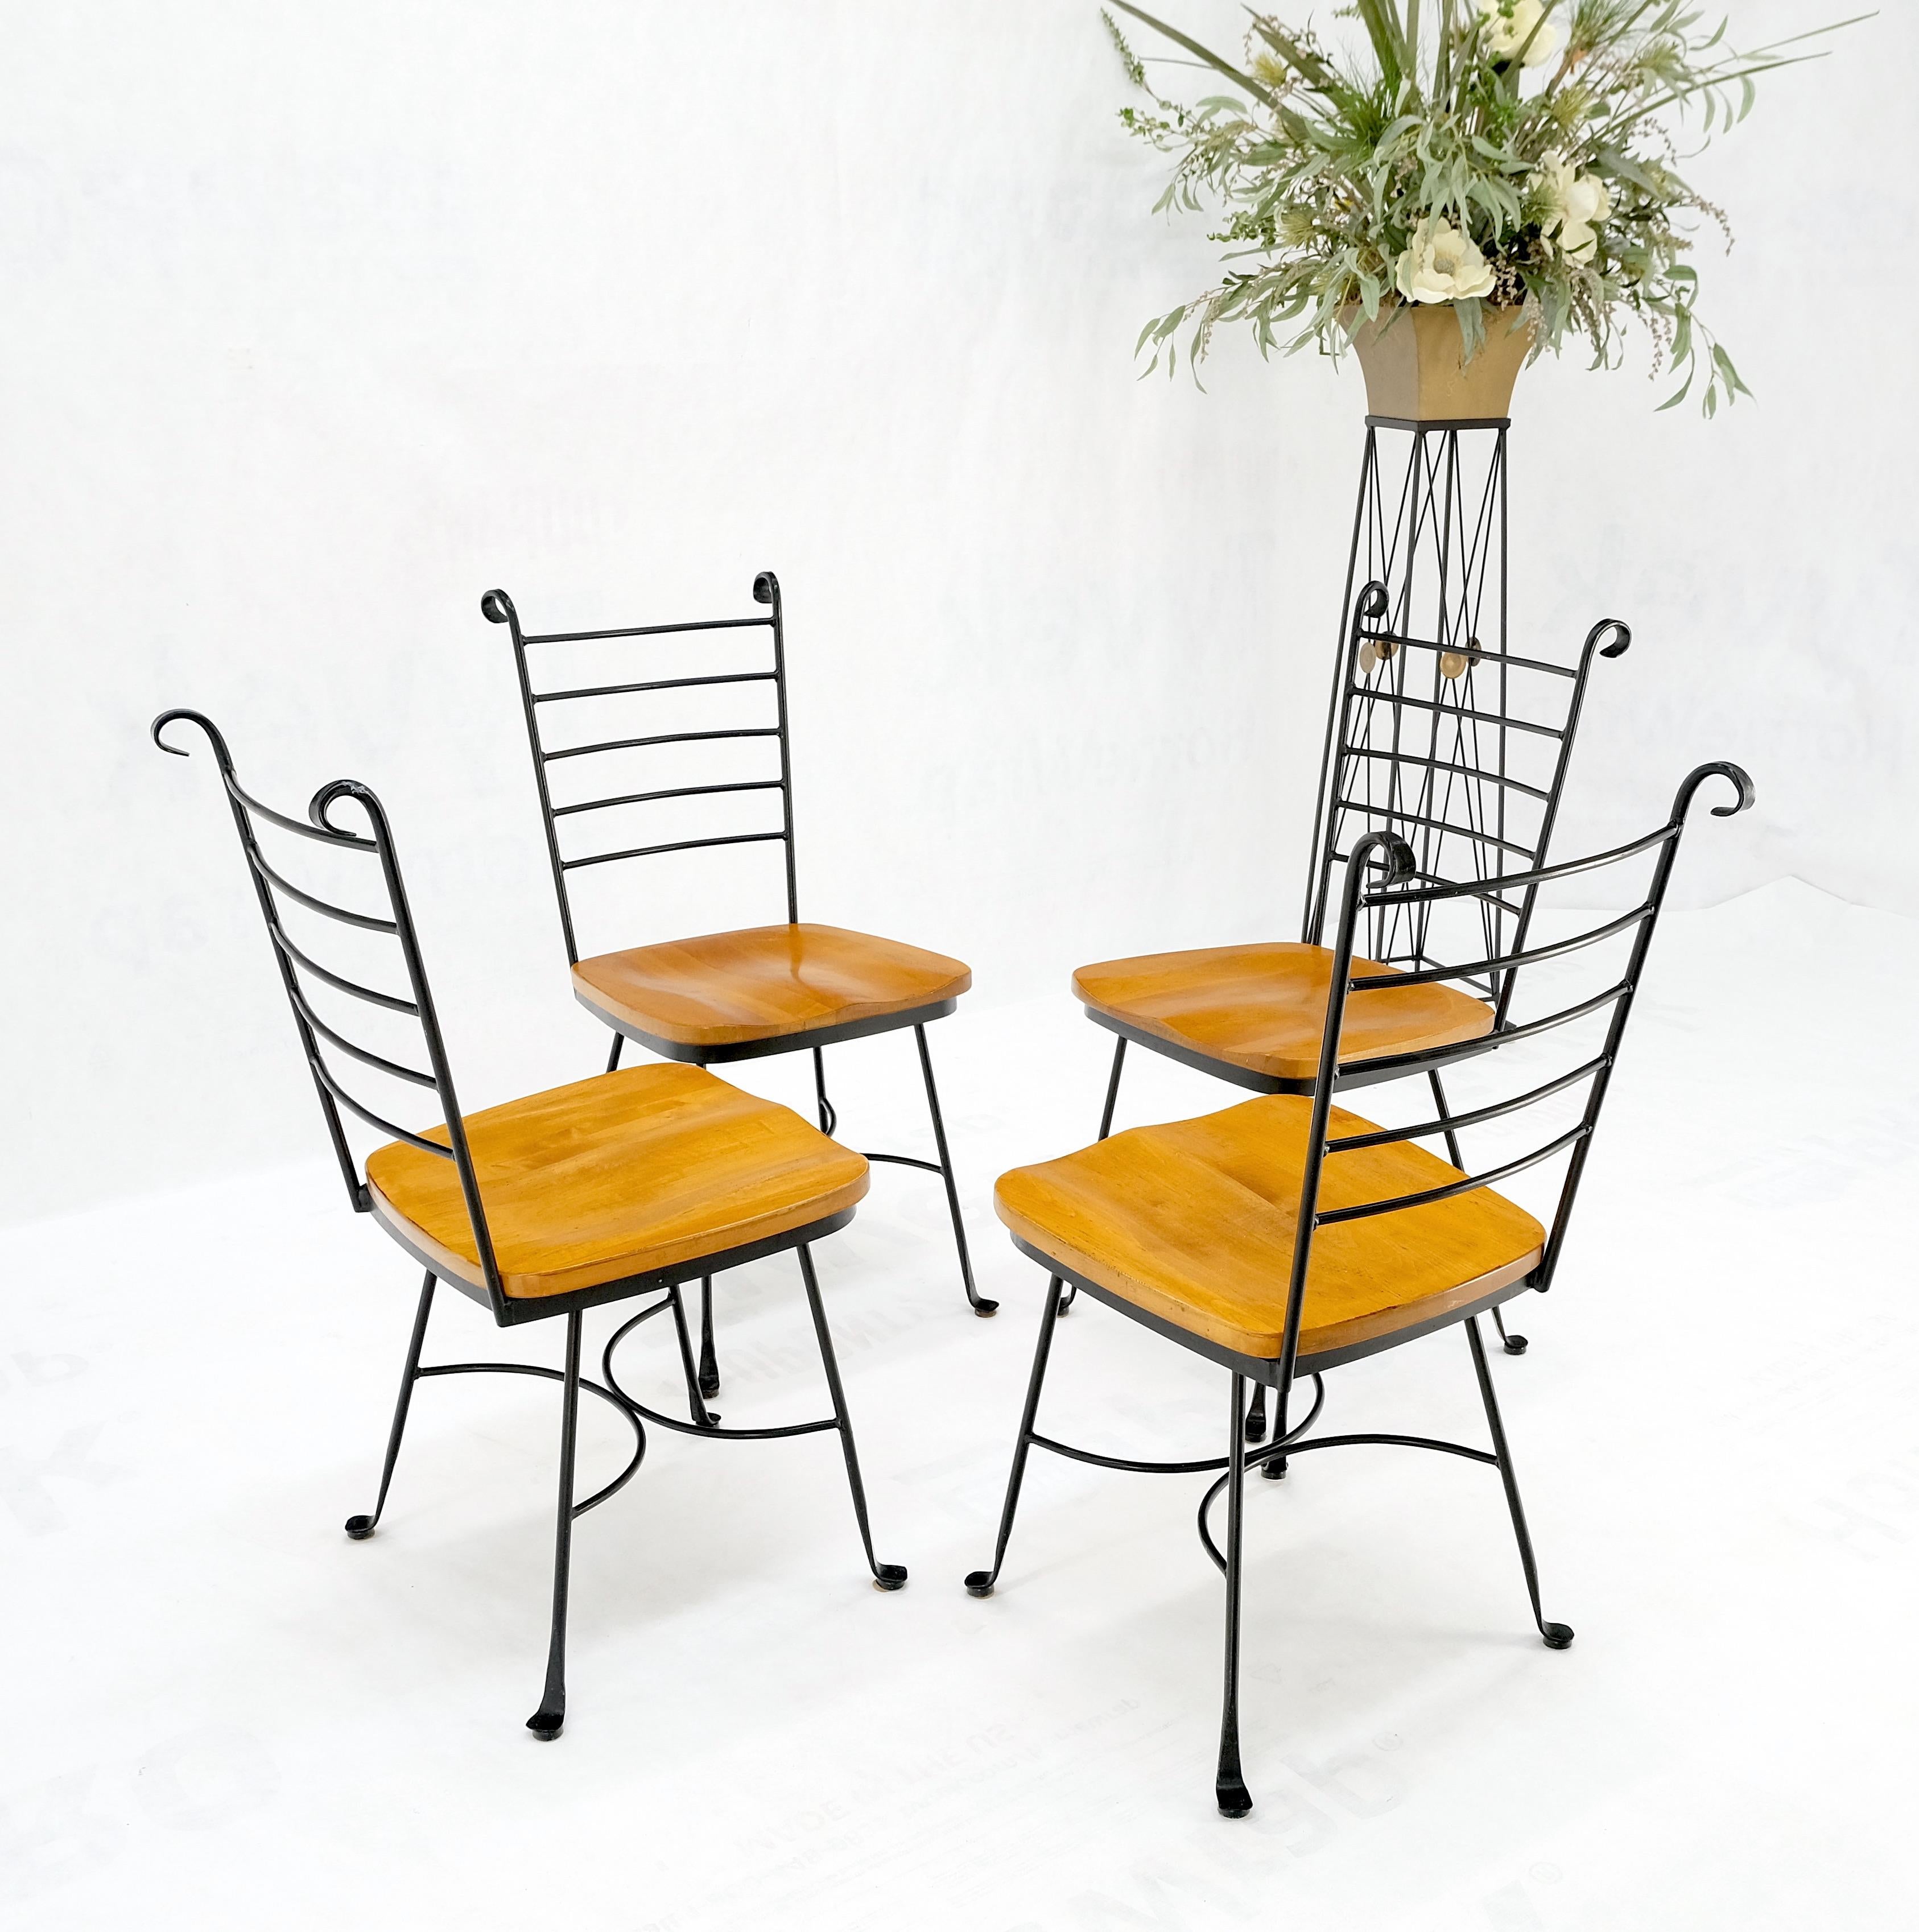 American Mid-Century Modern wrought iron & solid birch seats dining chairs mint!